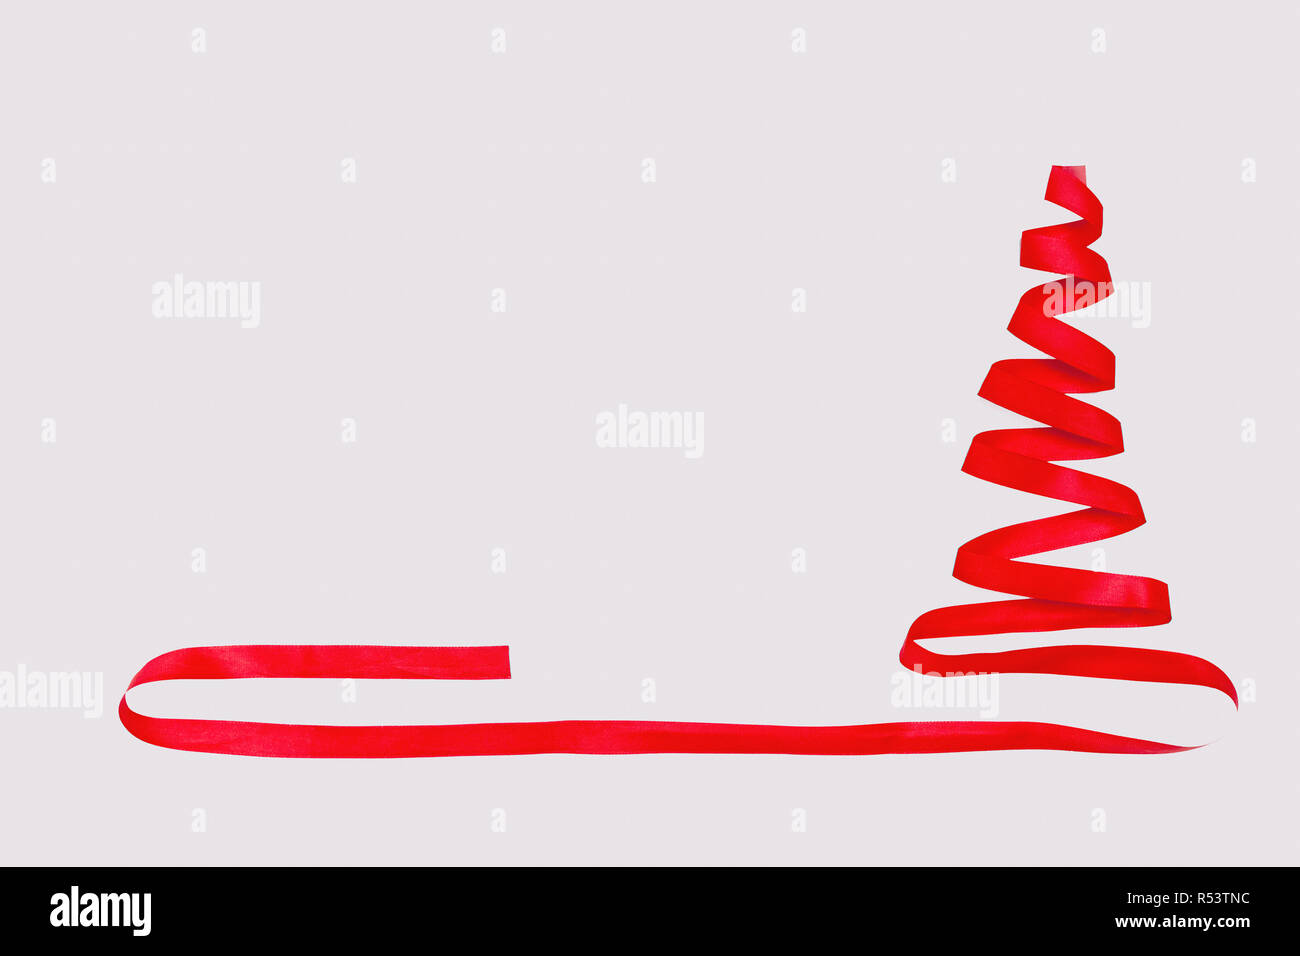 Concept with Christmas tree abstractly represented on white background Stock Photo